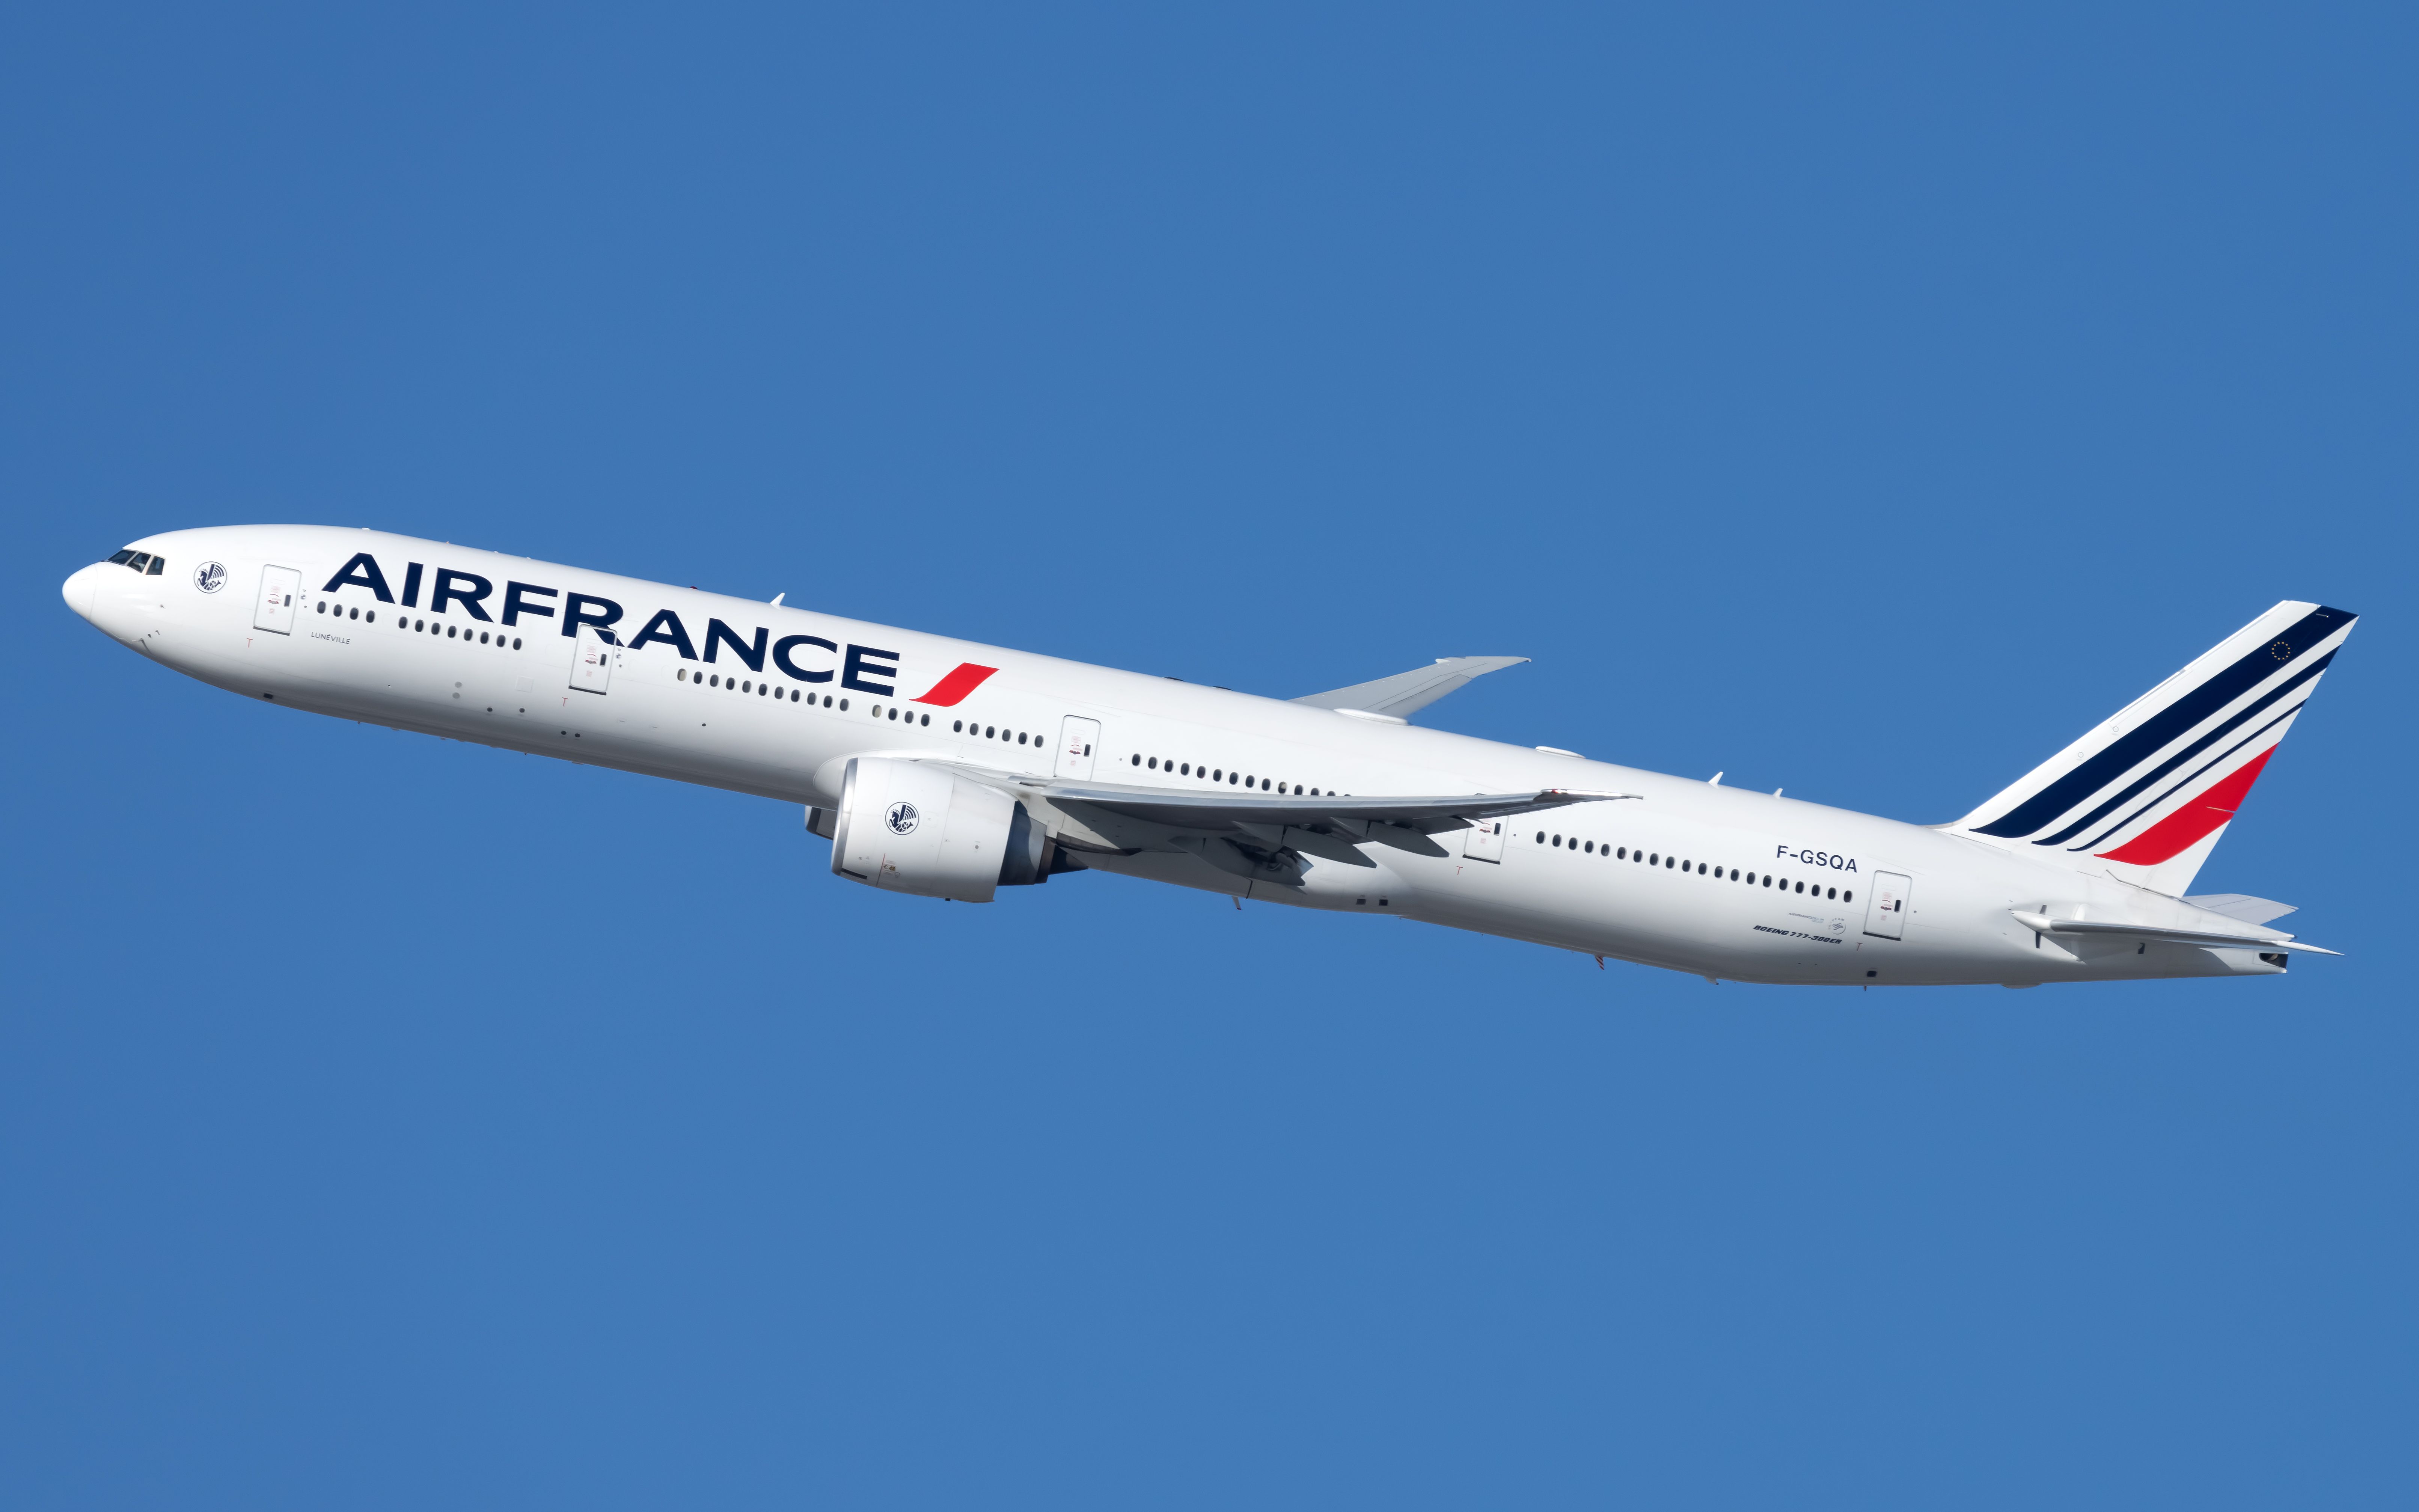 An Air France Boeing 777-300ER Flying In The Sky.